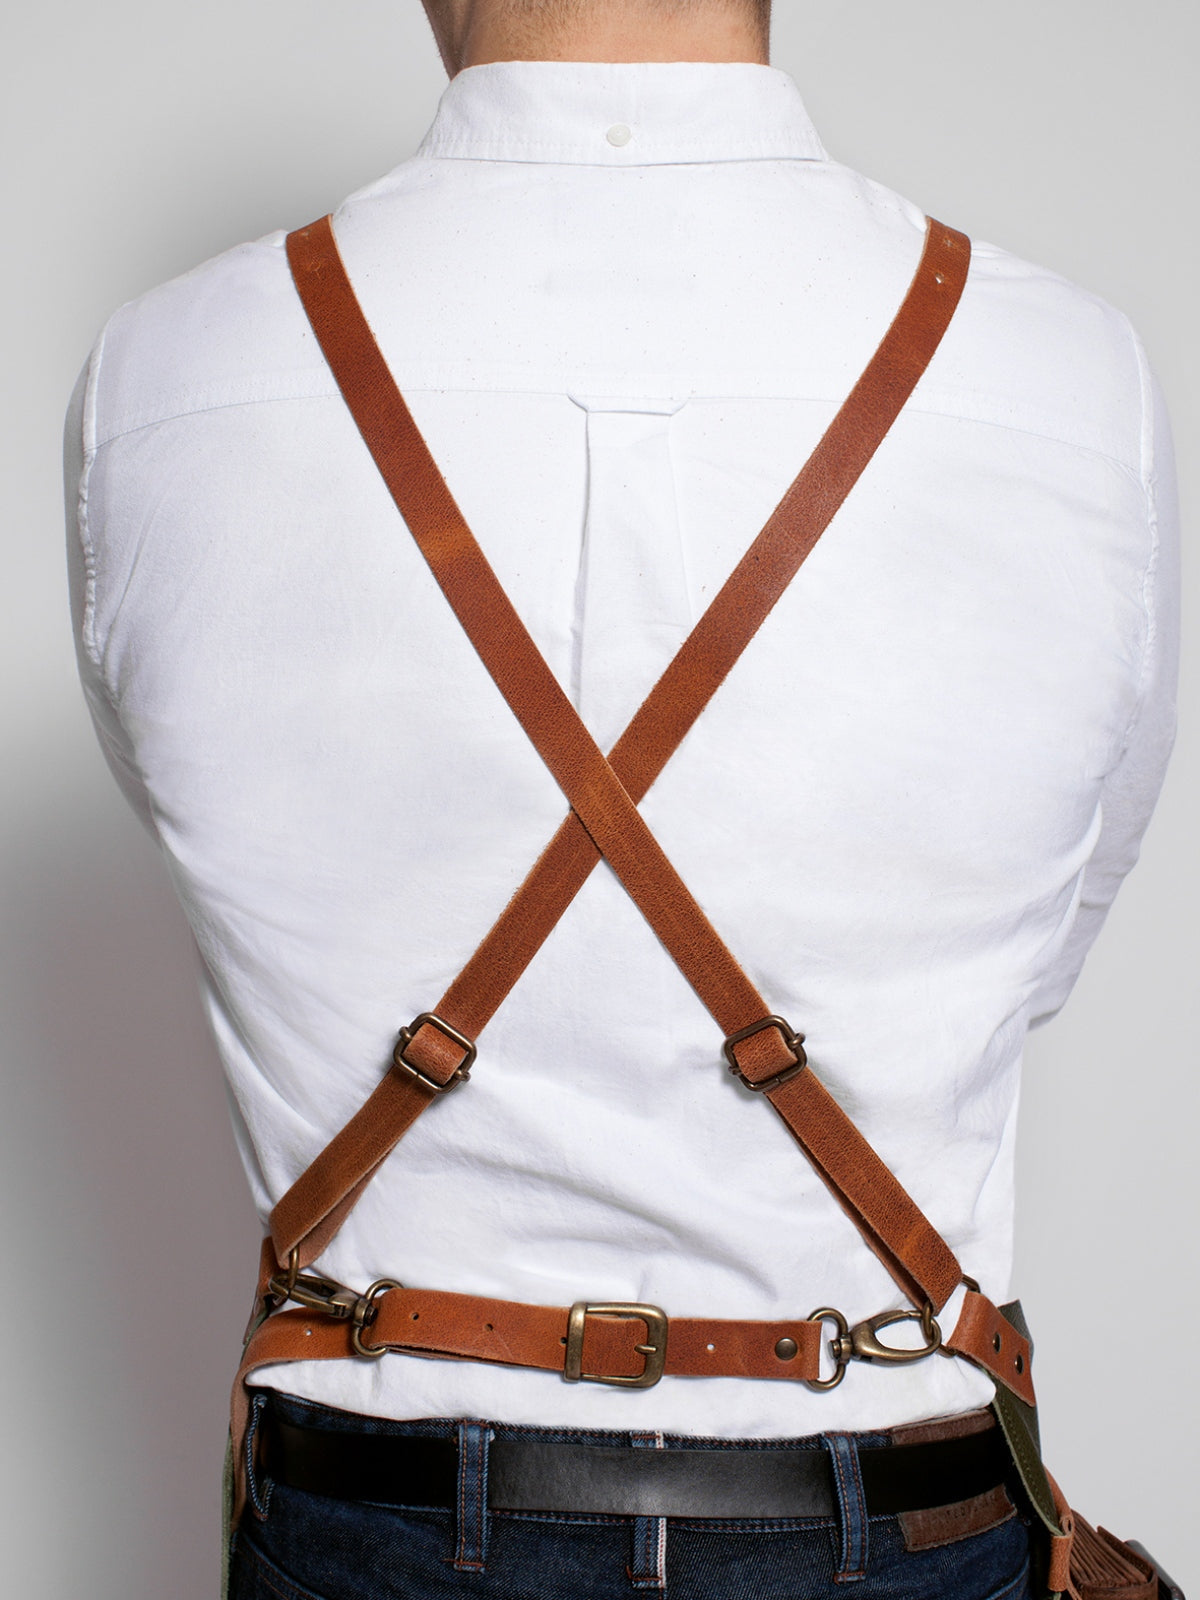 Leather Apron Cross Strap Deluxe Black by Stalwart -  ChefsCotton